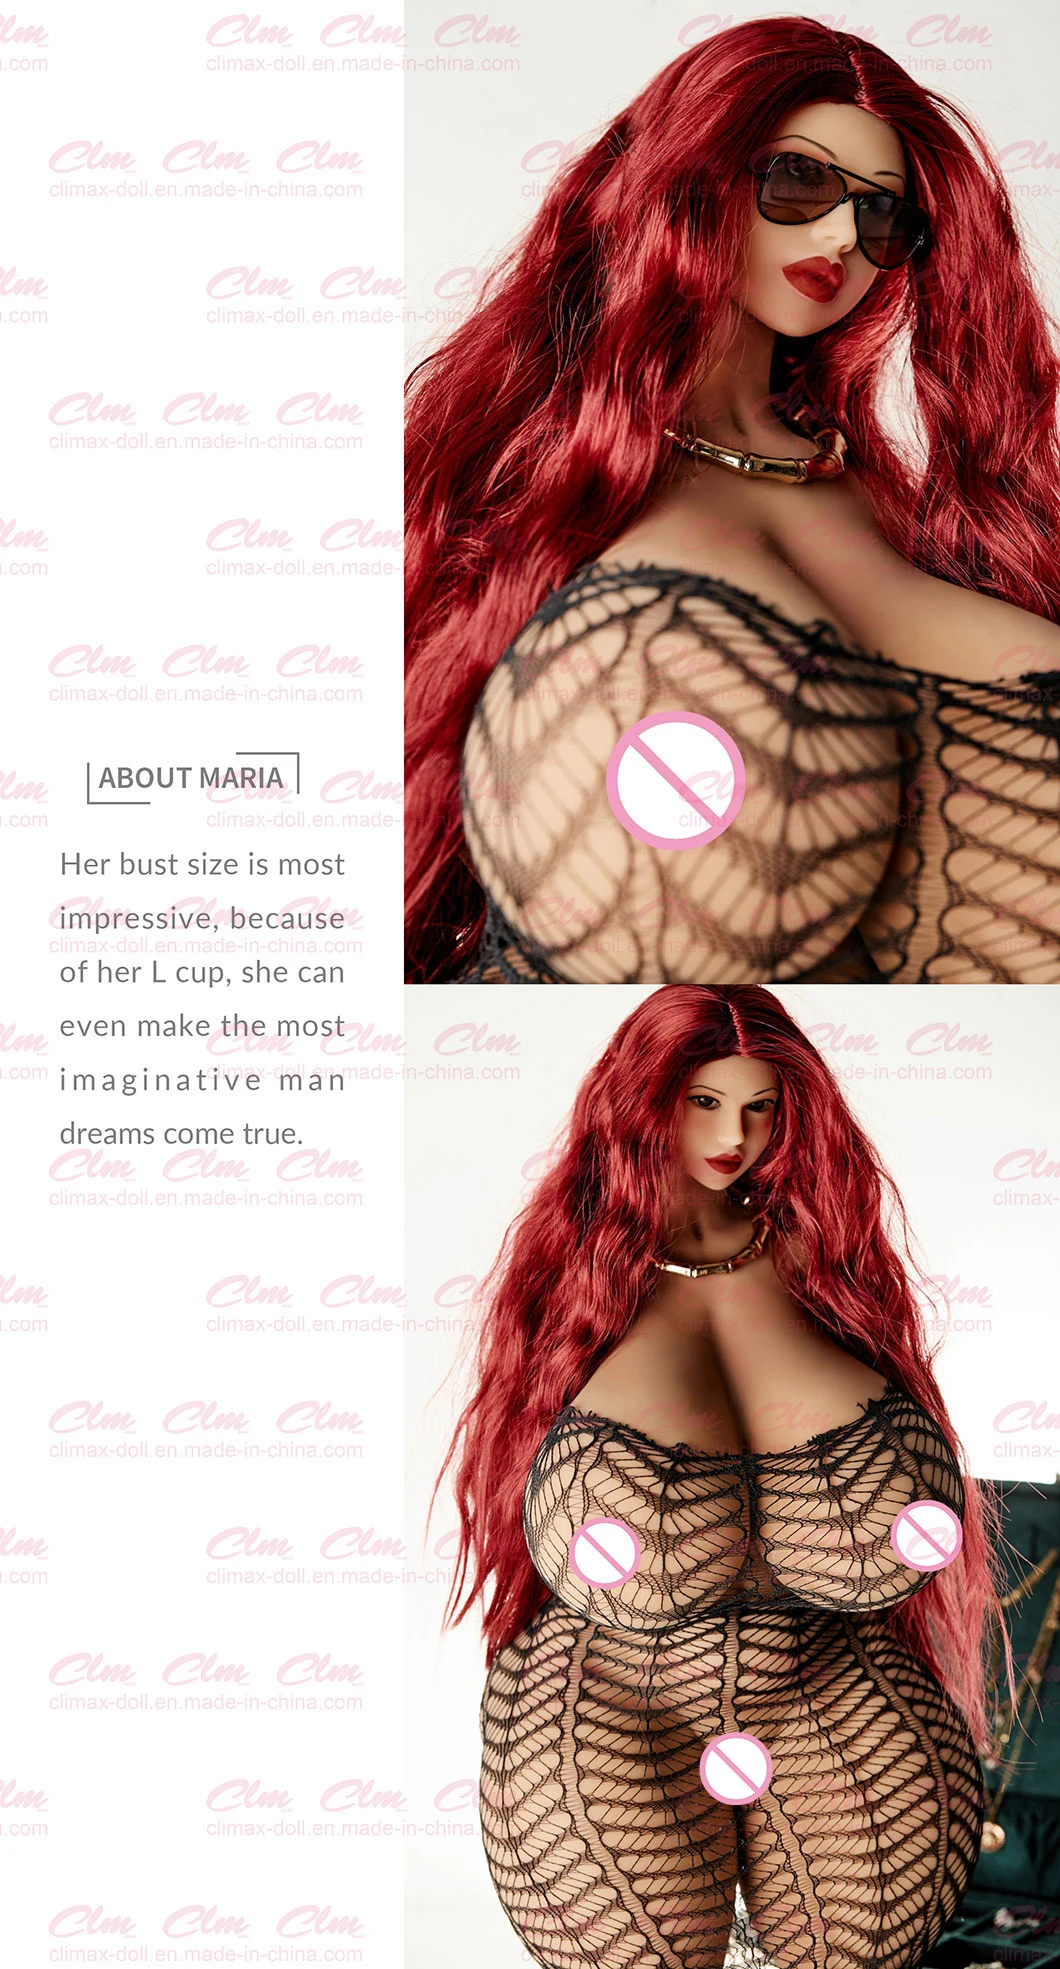 Clm (Climax Doll) 72cm Big Breast Skin Sex Doll Realistic Love Doll with Skeleton Sex Toy